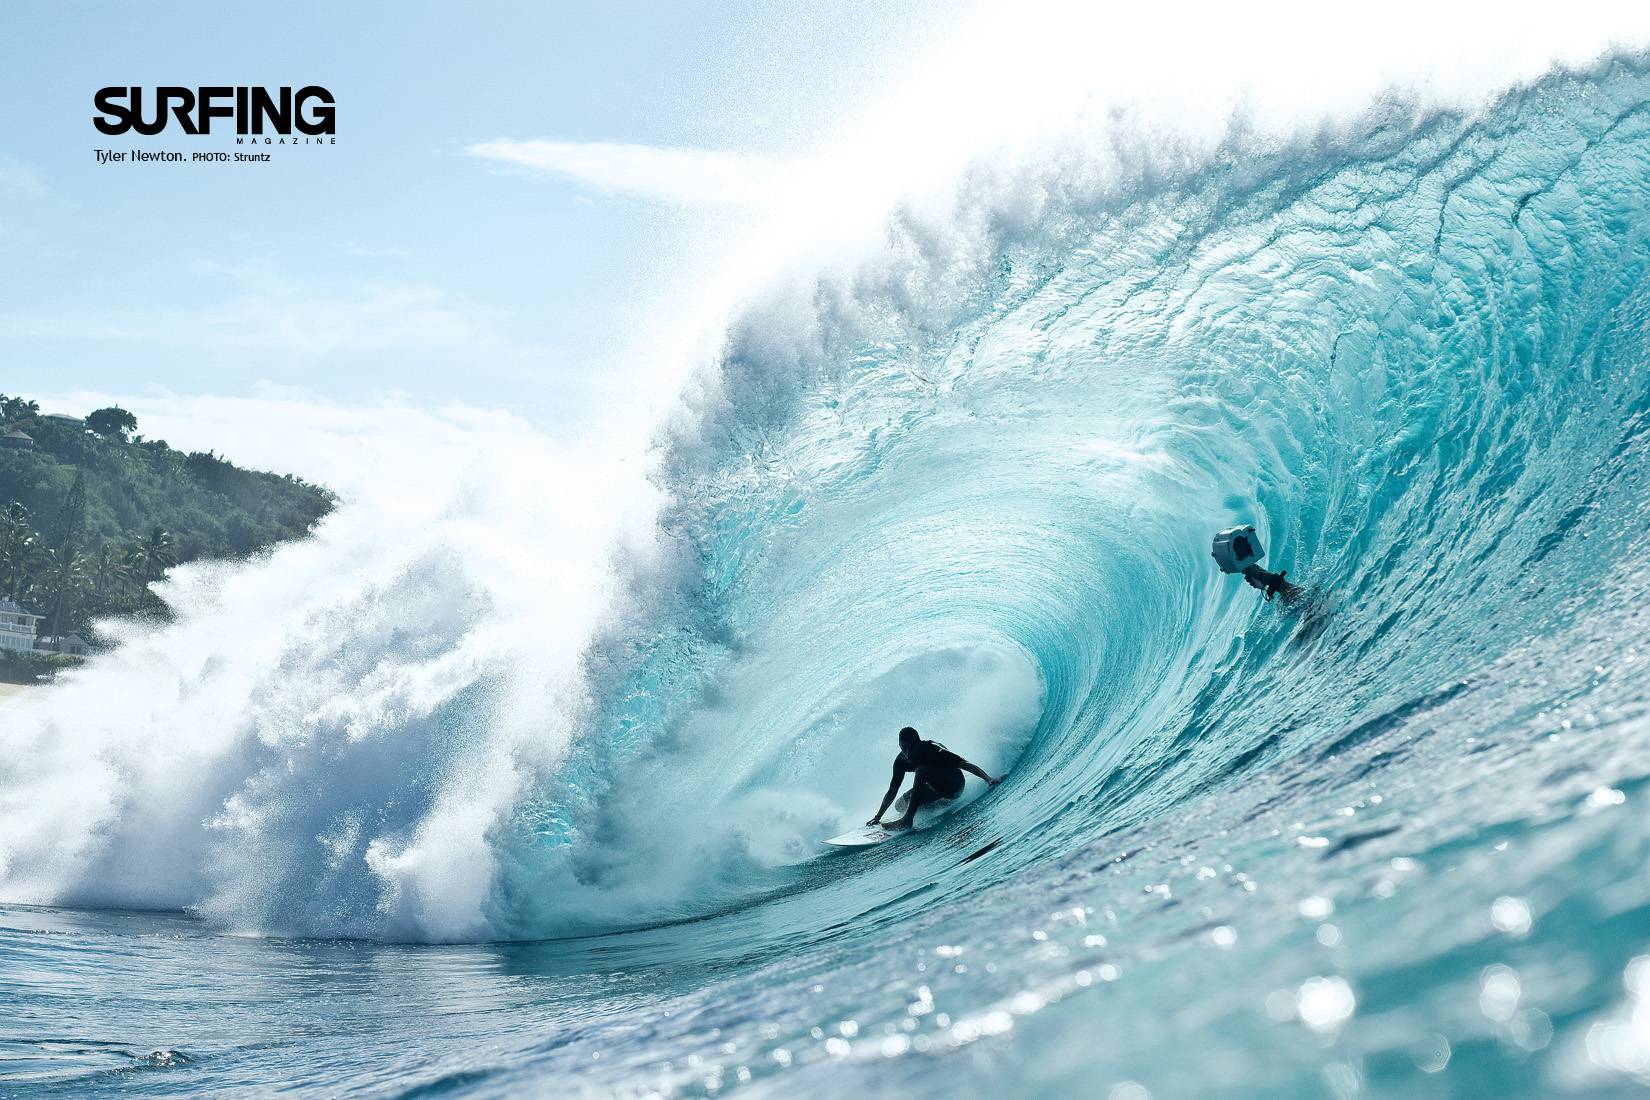 Surfing Wallpaper For Mac